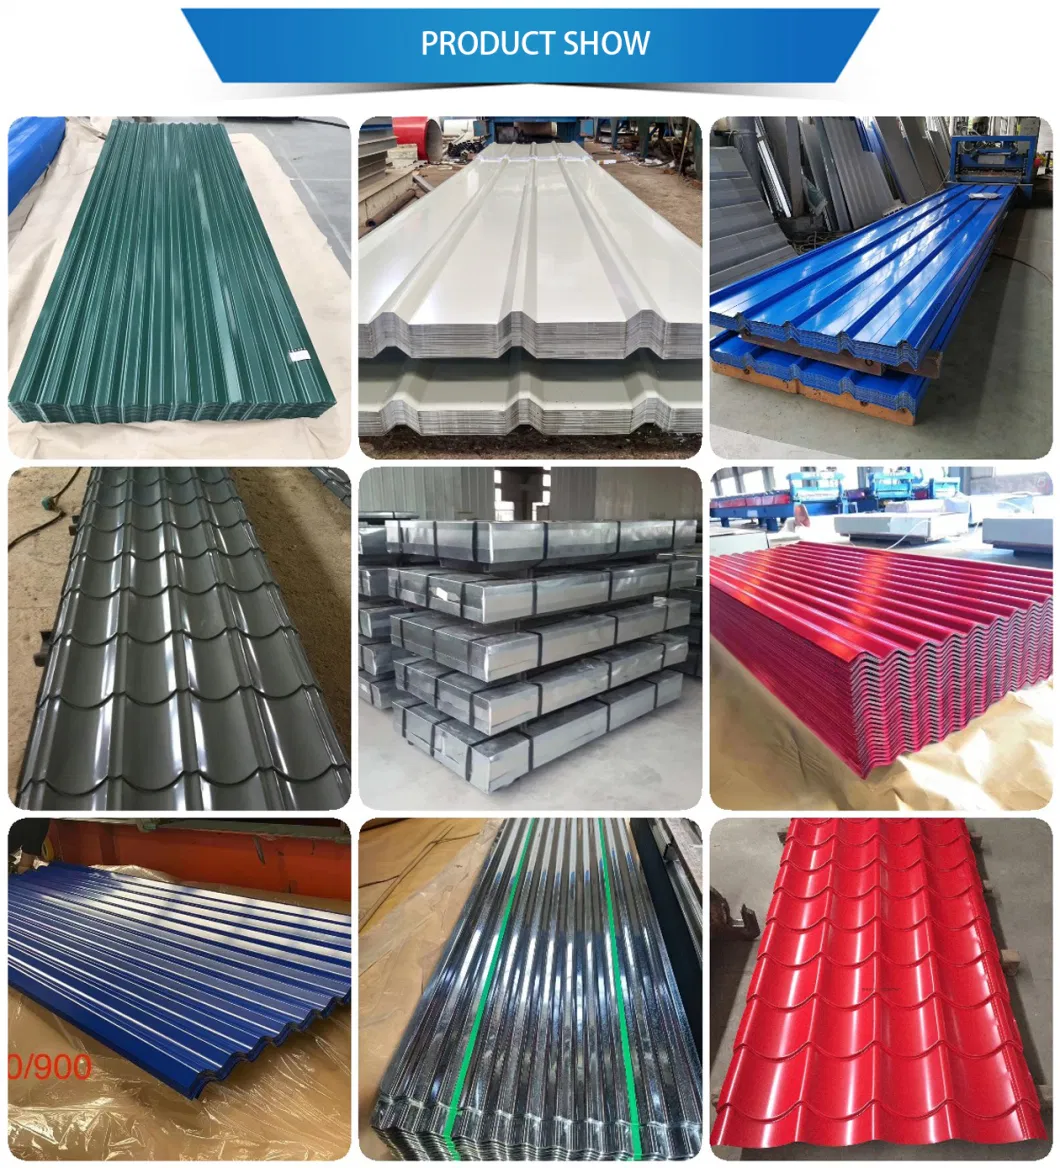 Customized Colored PC Building Material GRP FRP Laminate Fiberglass Roofing Sheet